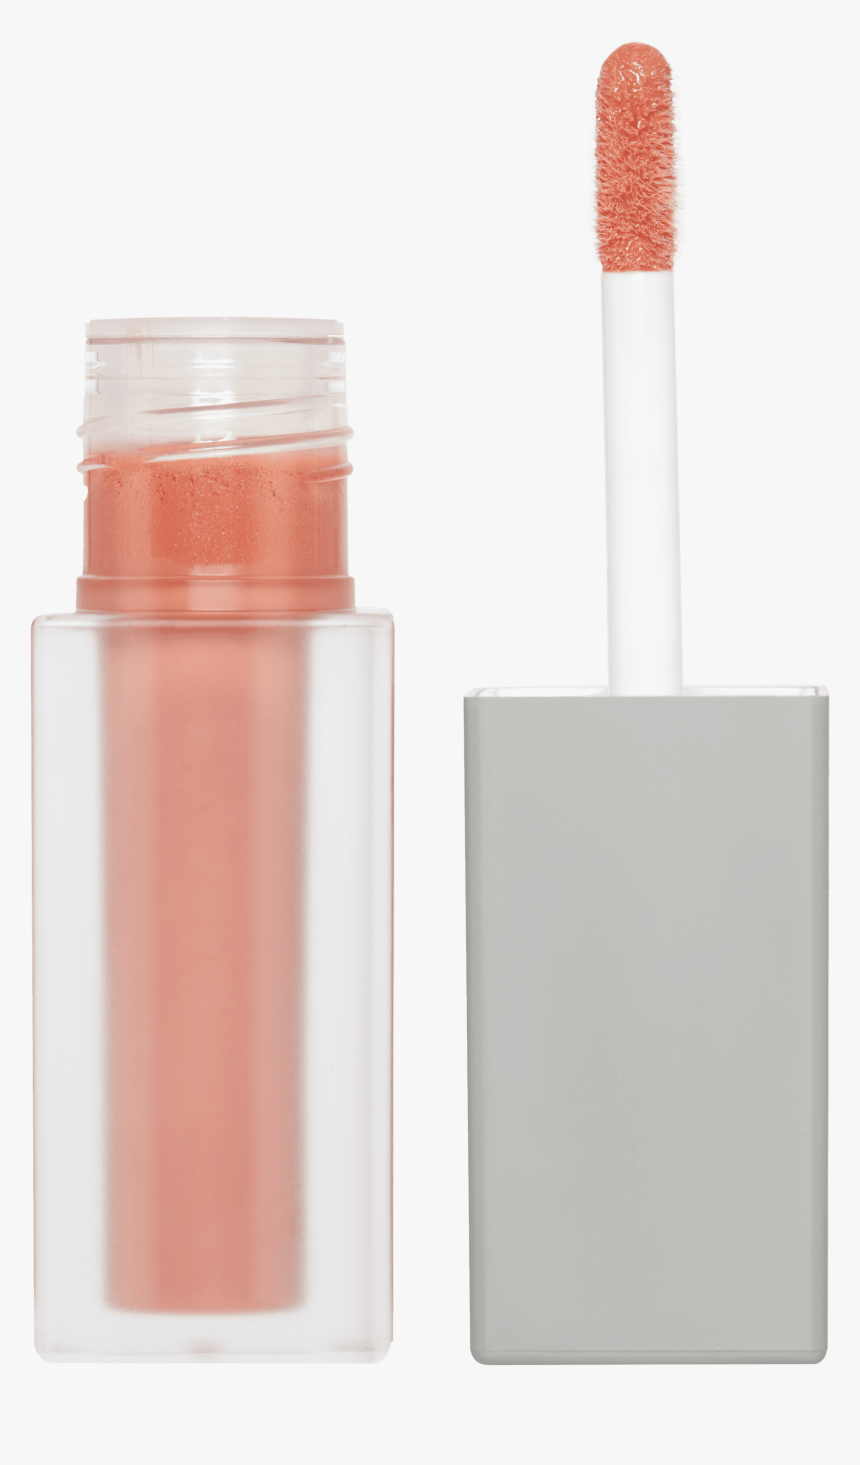 Kkw Beauty X Mario High Shine Lip Gloss In Juicy - Kkw Beauty, HD Png Download, Free Download